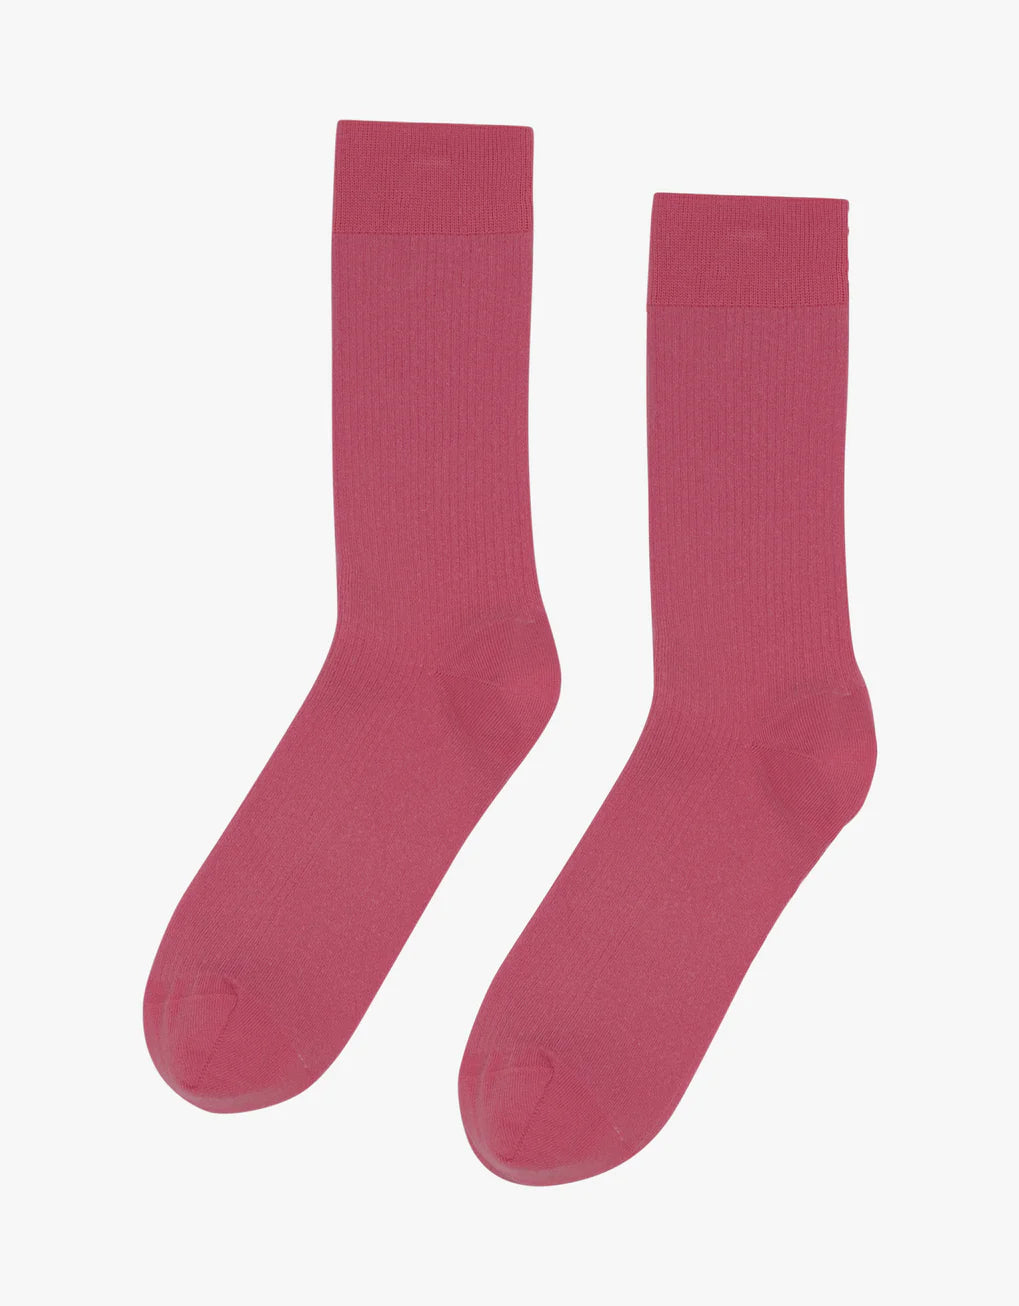 A pair of Colorful Standard Classic Organic Socks on a white breathable background.